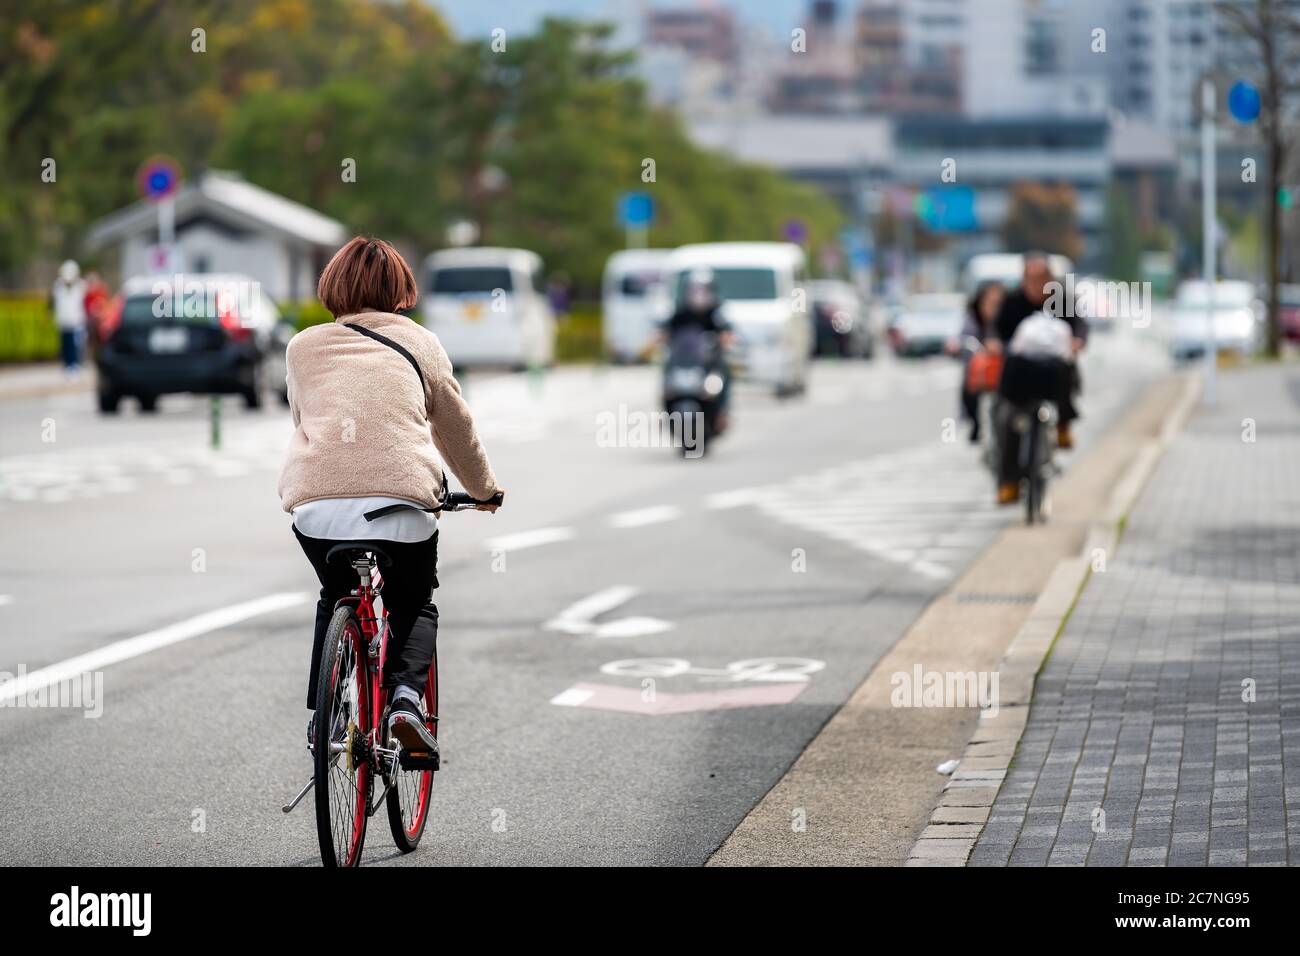 Kyoto, Japan - April 17, 2019: Japanese person back on bicycle riding bike on street candid city life with traffic cars road near station Stock Photo